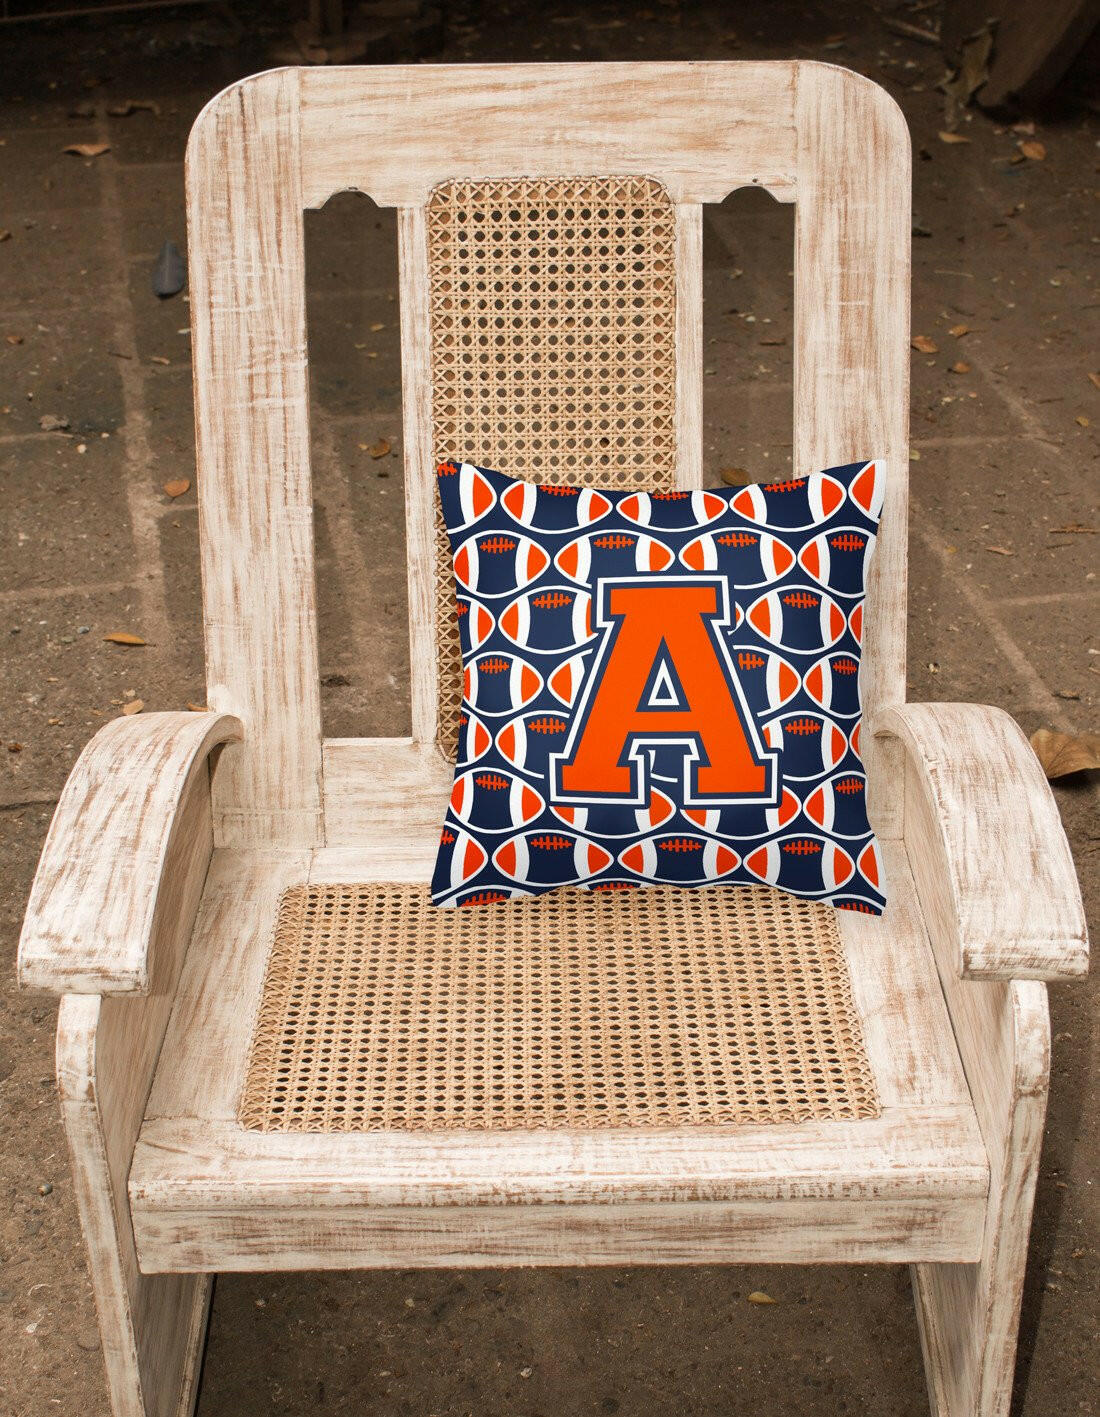 Letter A Football Orange, Blue and white Fabric Decorative Pillow CJ1066-APW1414 by Caroline's Treasures